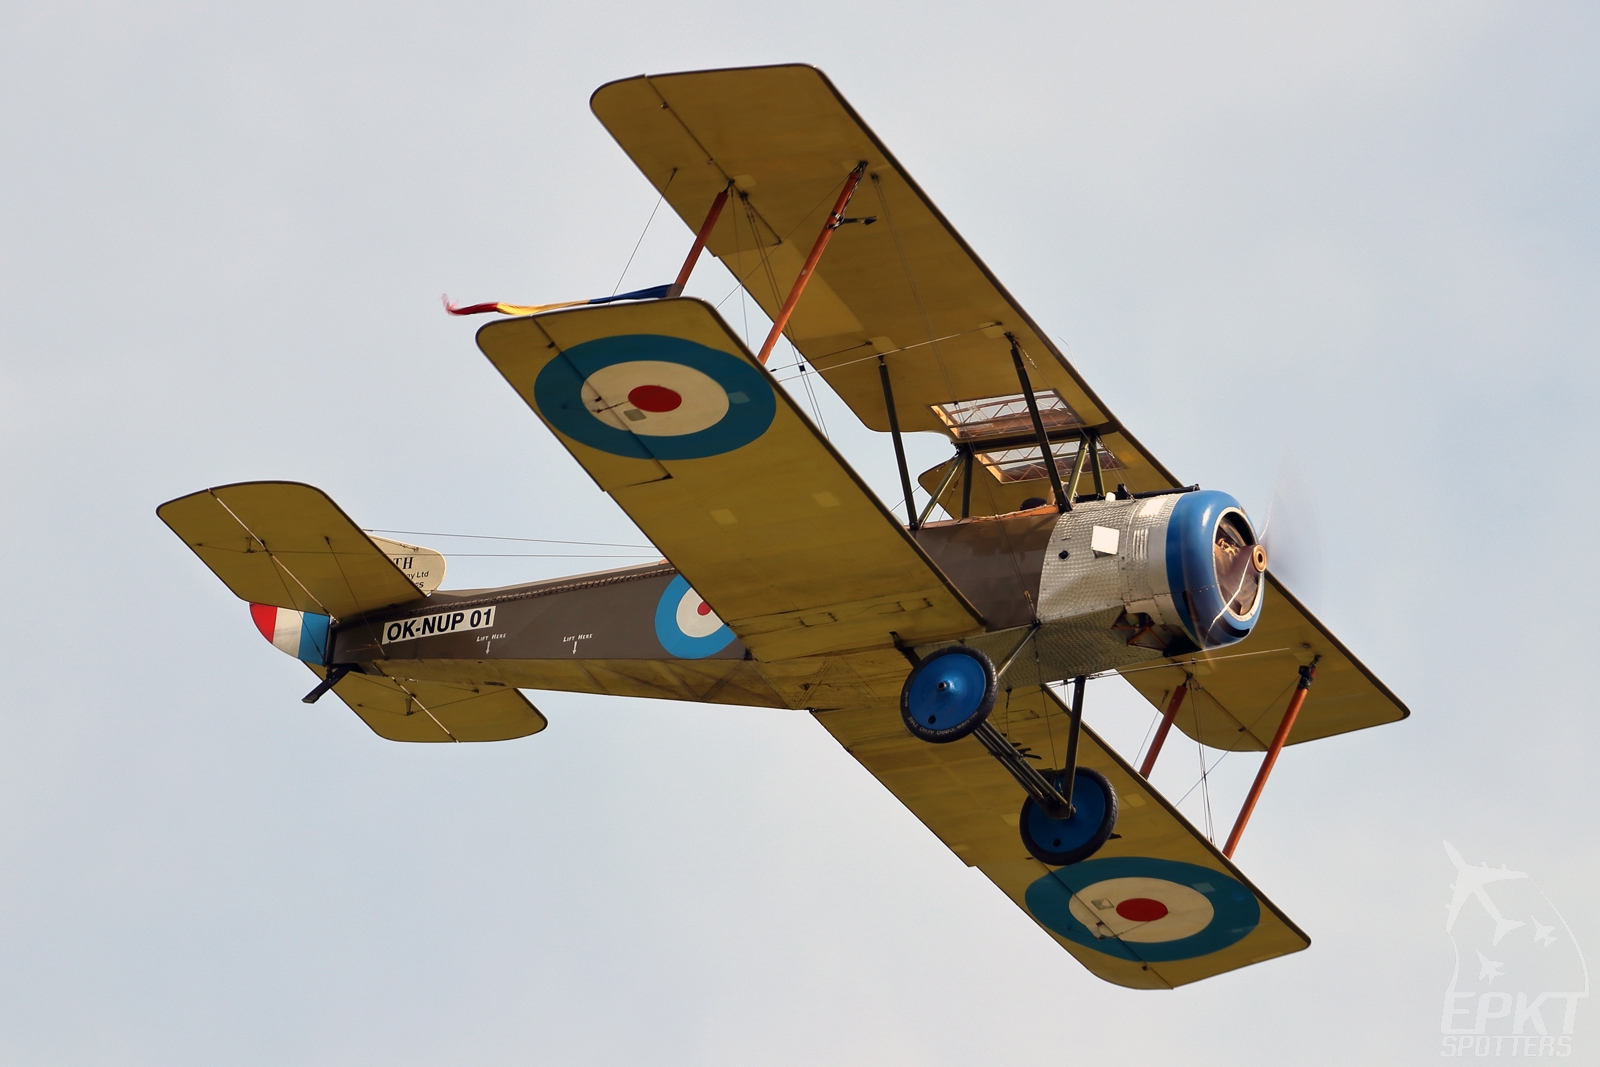 OK-NUP01 - Sopwith Strutter 1 1/2 (Private) / Muchowiec - Katowice Poland [EPKM/]